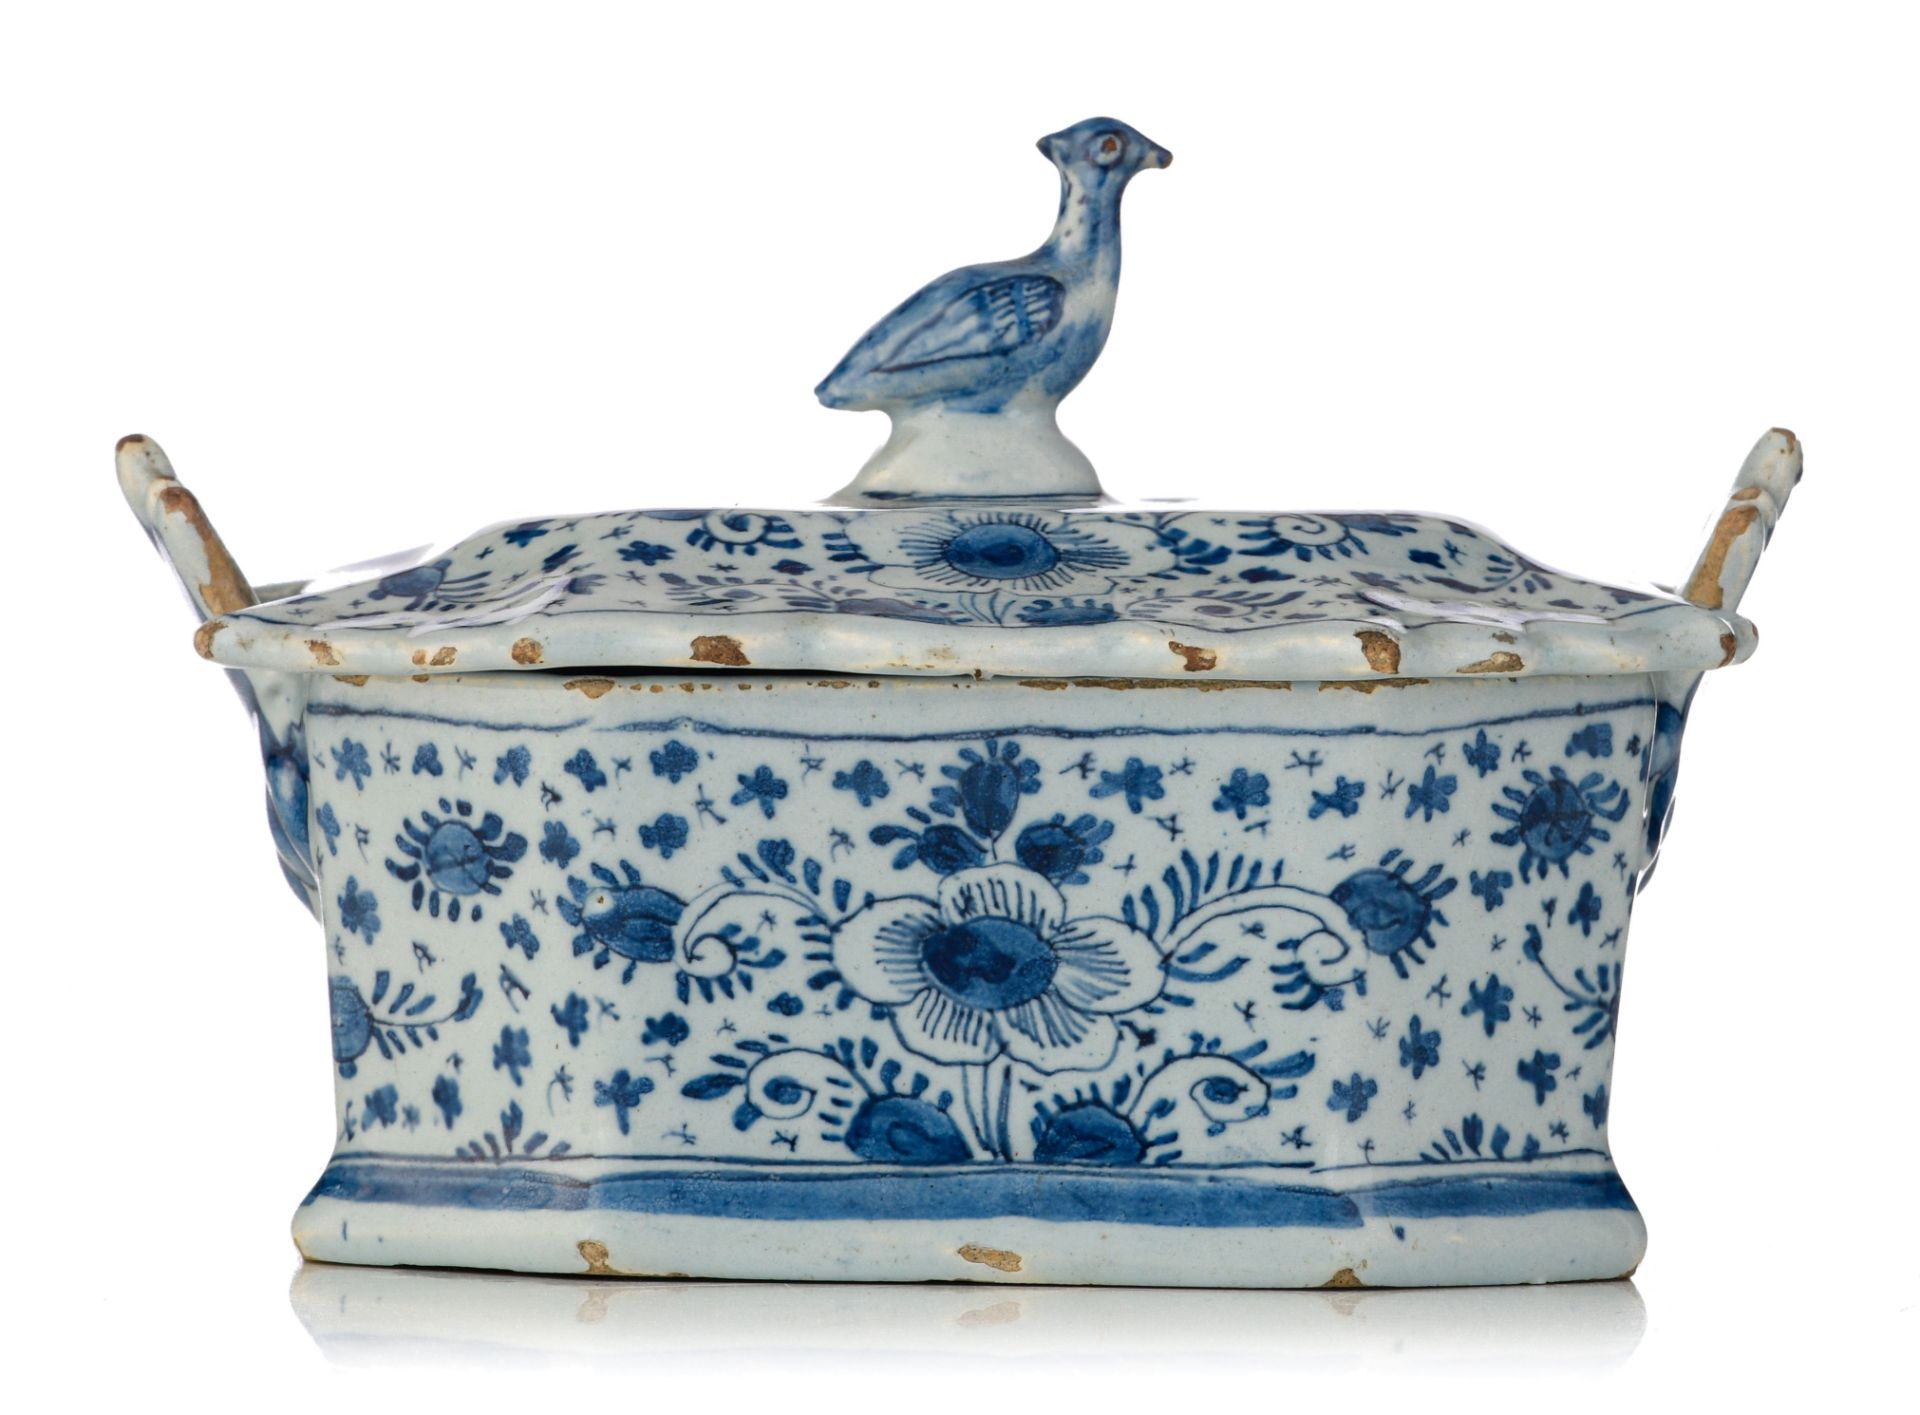 (BIDDING ONLY ON CARLOBONTE.BE) A fine Delft blue and white butter tub, marked 'De Lampetkan', 18thC - Image 2 of 14